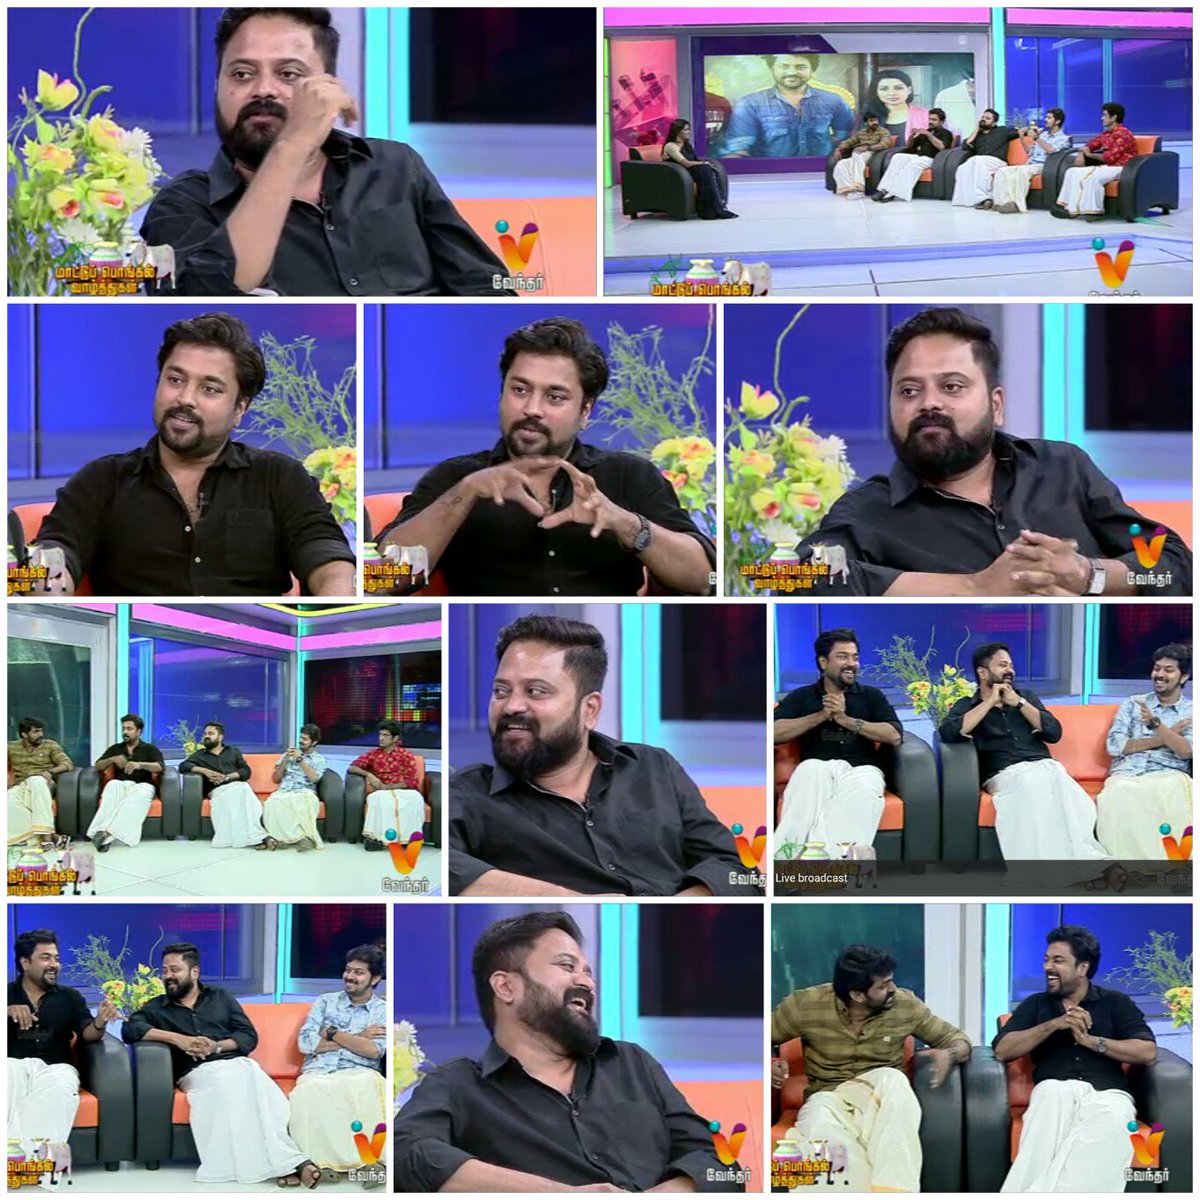 So much fun even in 30min interview👏😜😝👌 now I'm thinking how the movie'll be.. #GalattaGang😂😂 #ThittamPoattuThiruduraKootam @raghunathan_ps @moulistic Anna's😋😋😍😍 &Team at @Vendhamedia @Vendhartv #PongalSpecial #TPTK....❤❤❤ #Promotion